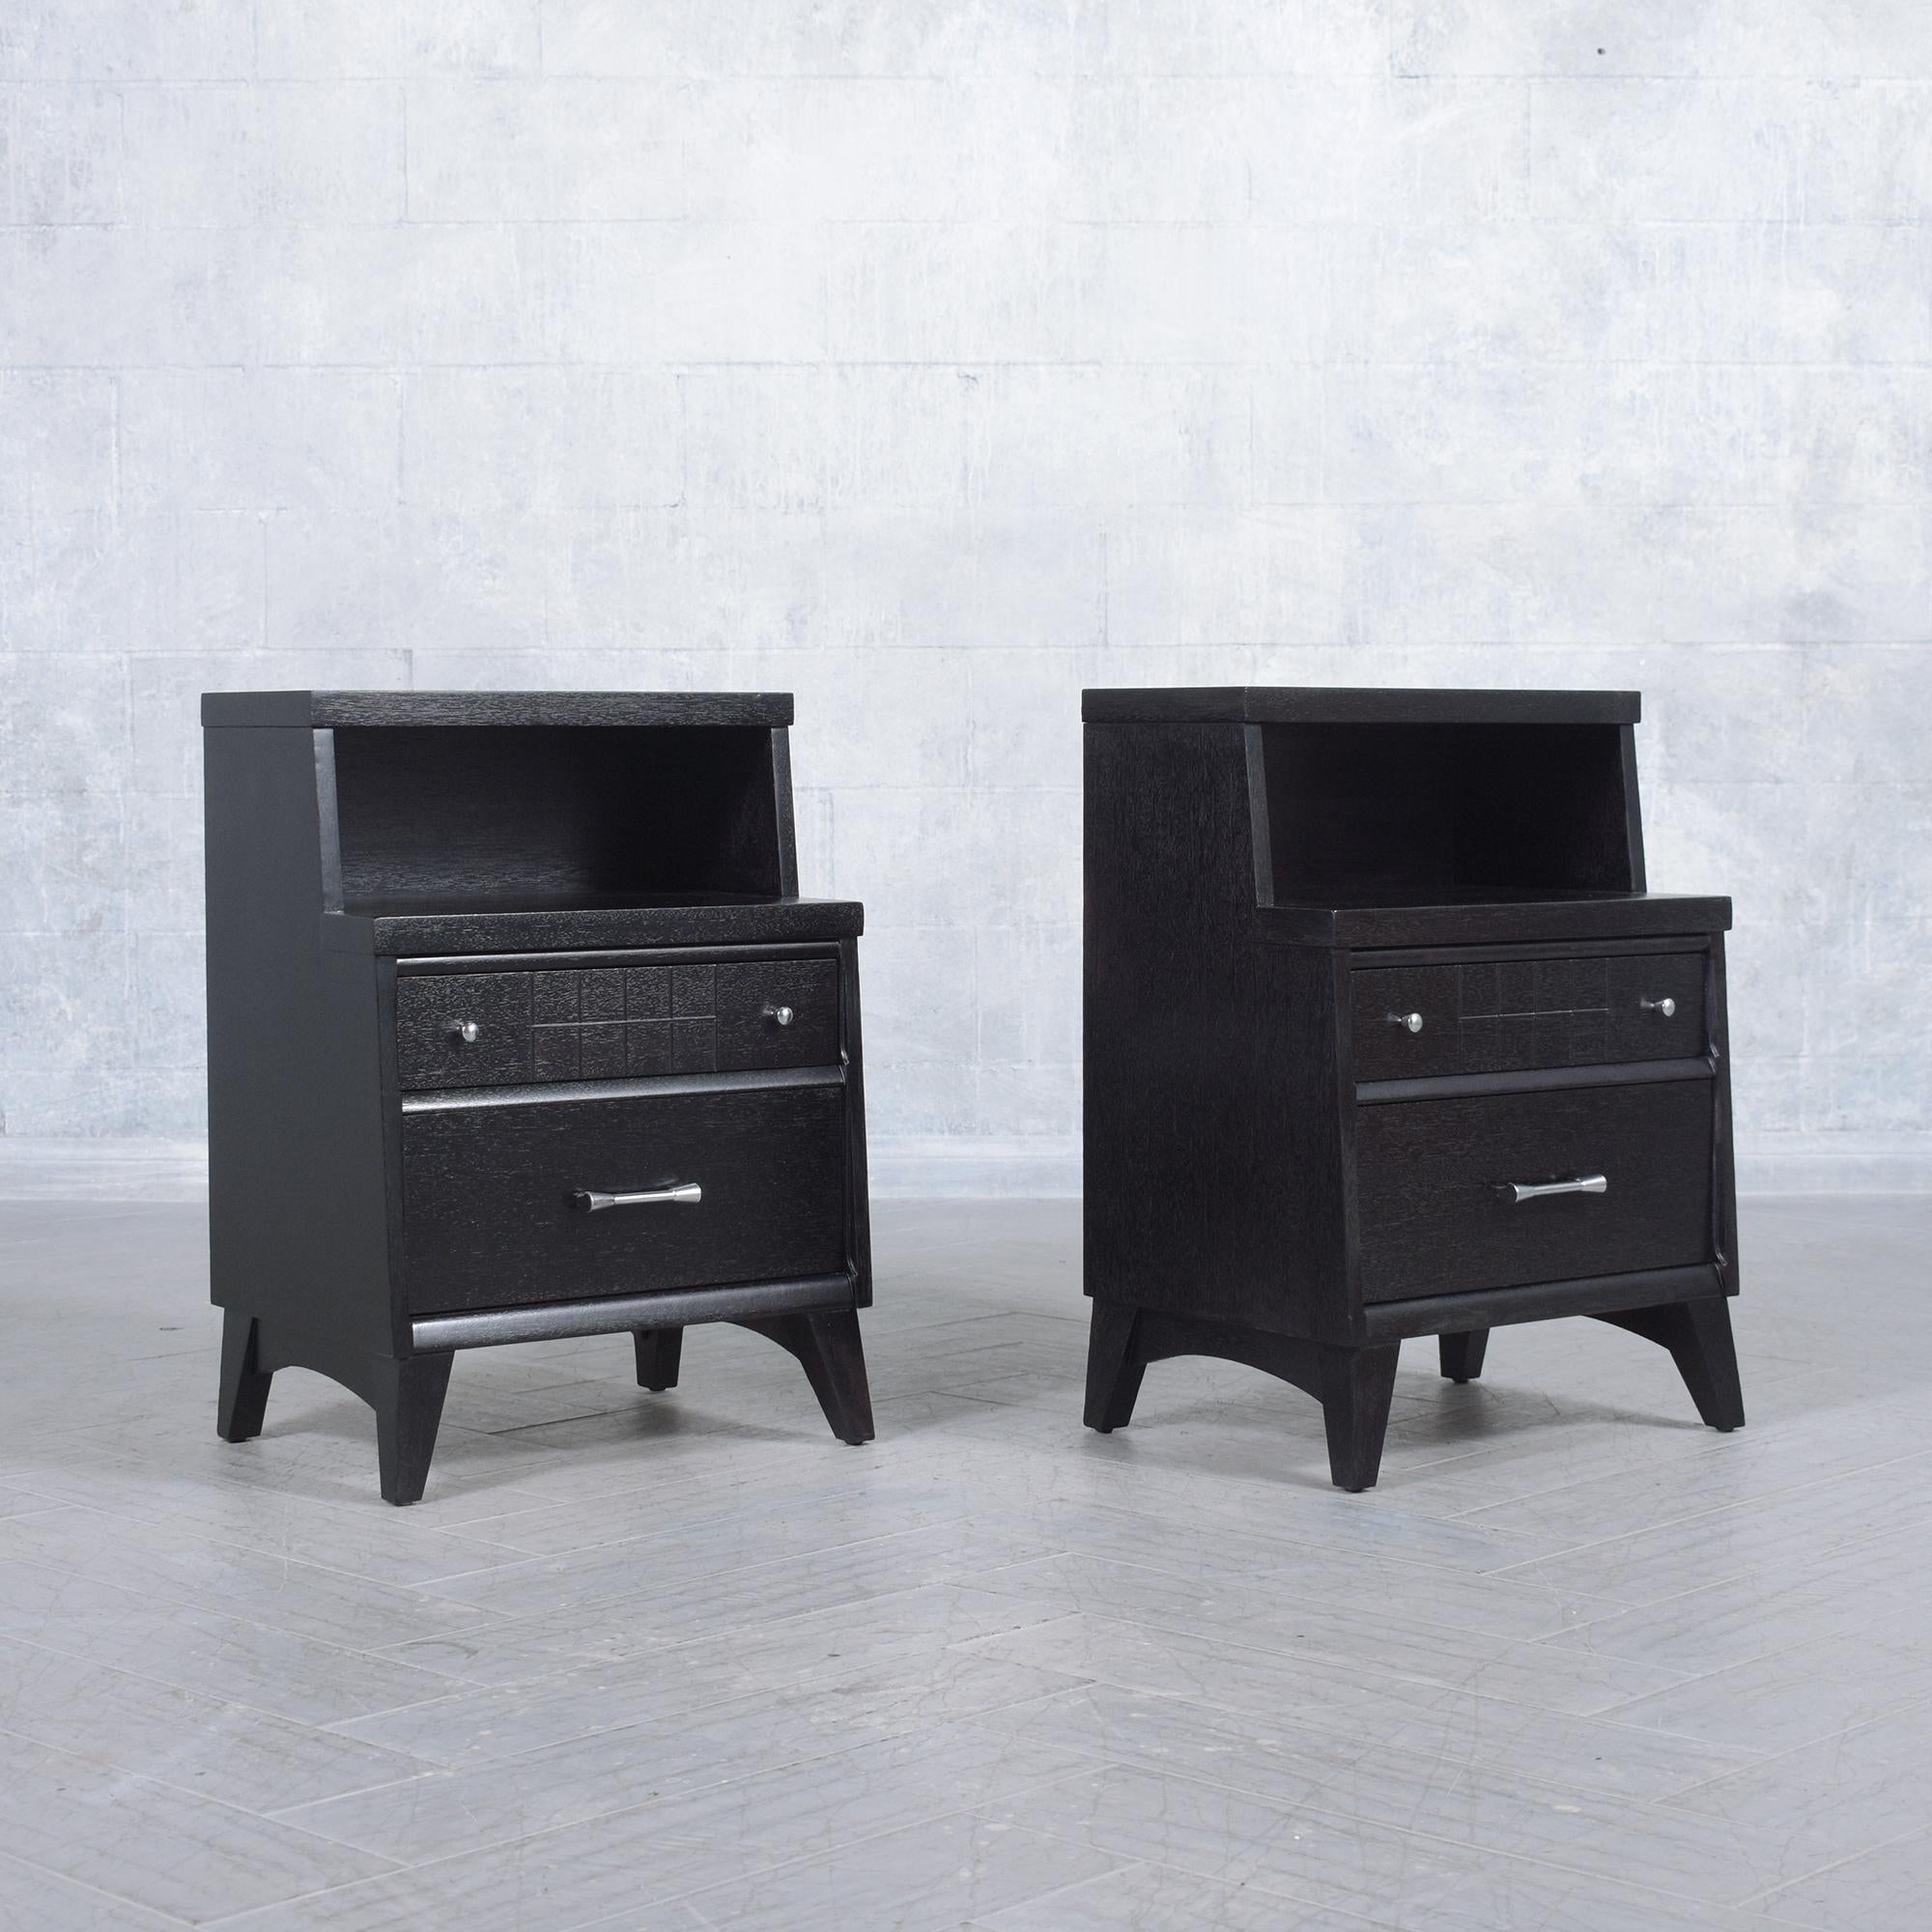 Restored Mid-Century Modern Nightstands with Ebonized Finish and Chrome Hardware For Sale 3